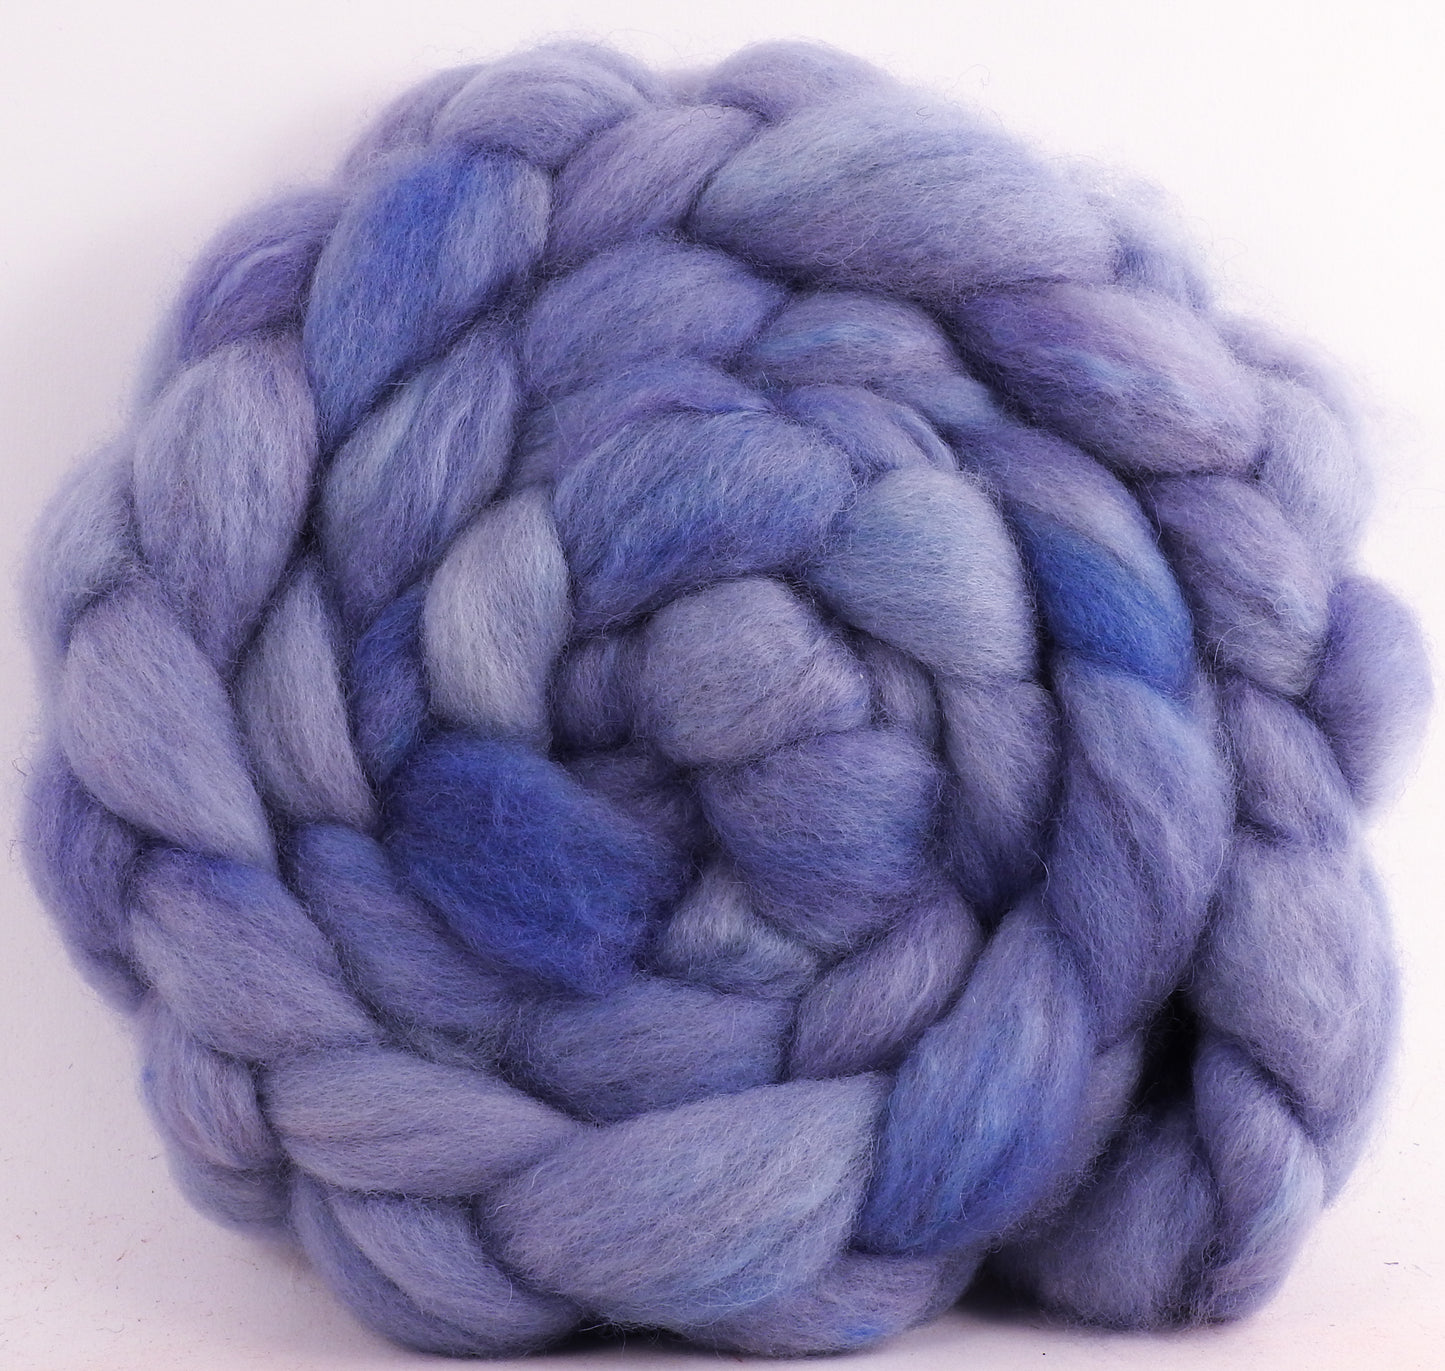 Periwinkle ( Light)- Blue-faced Leicester/ Mohair (70/30) - (5.8 oz.)